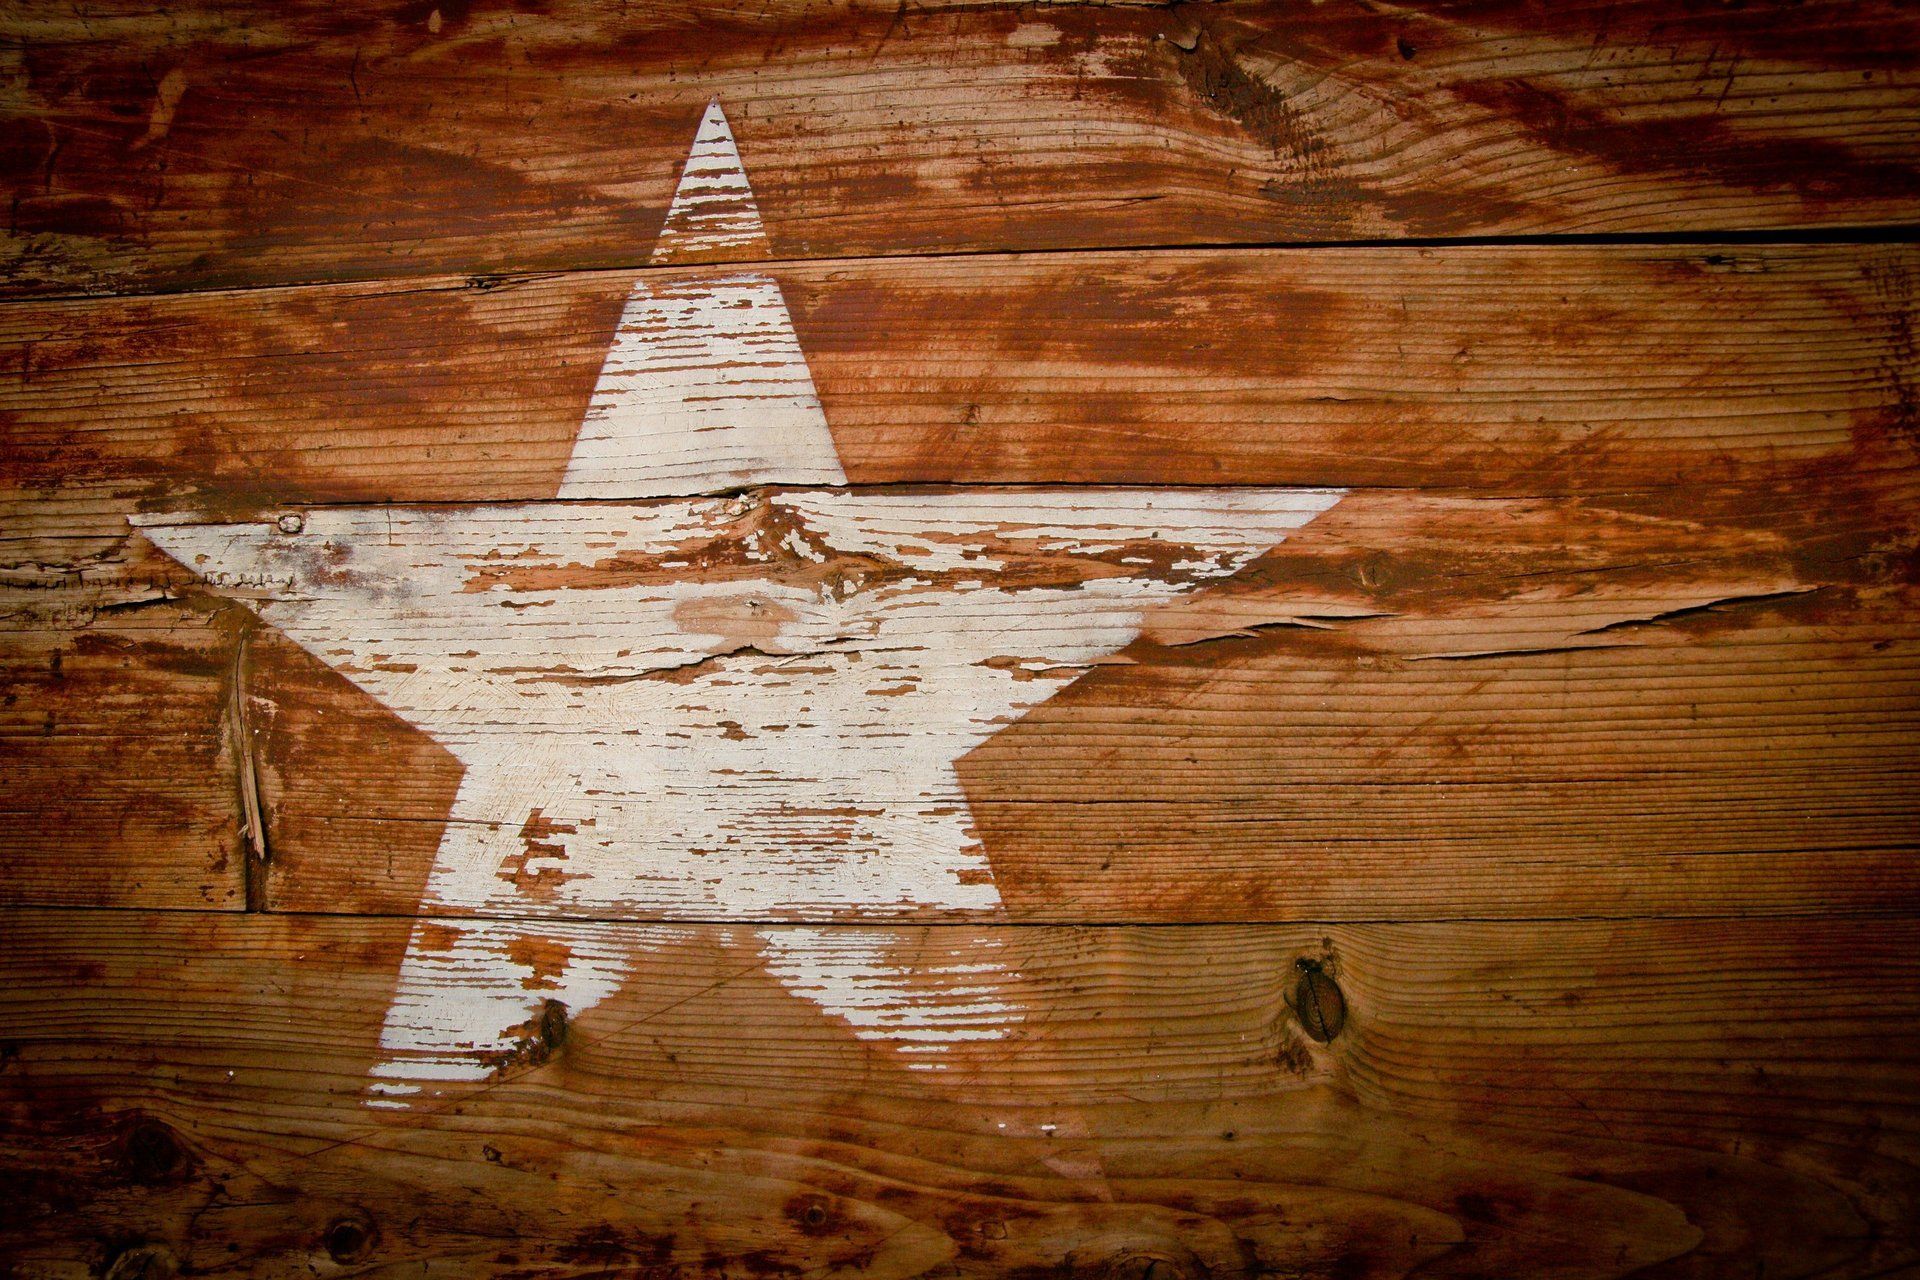 A white star is painted on a wooden surface.